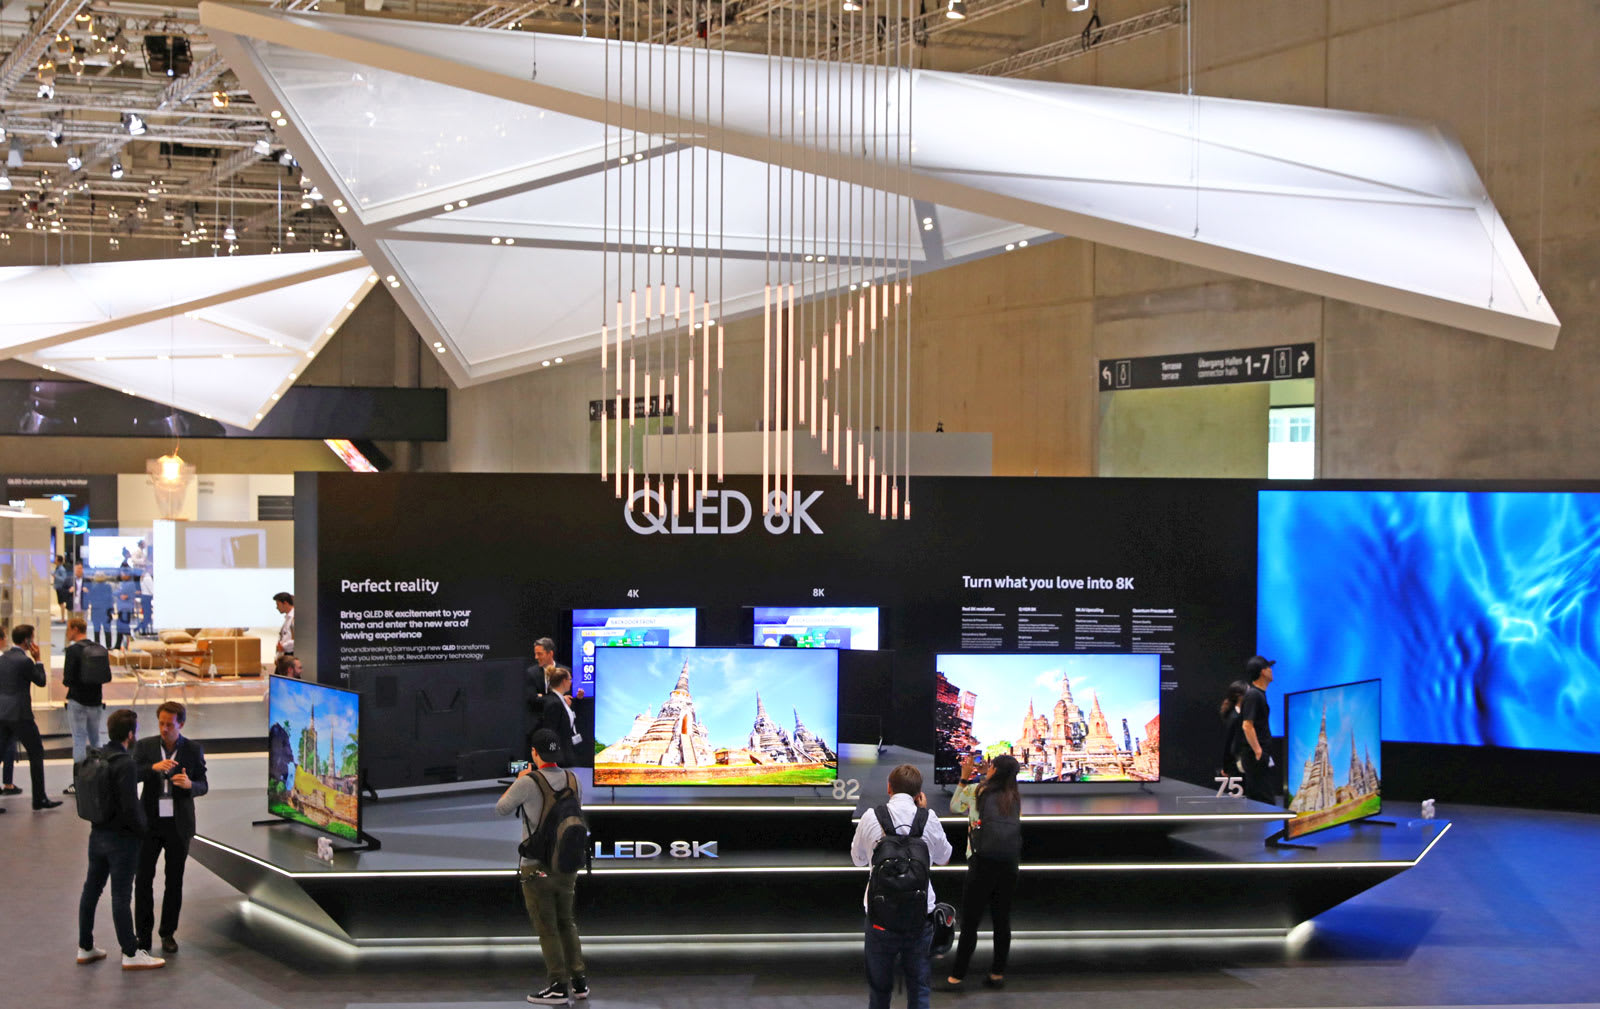 Samsung's case for buying an 8K TV: Why wait?